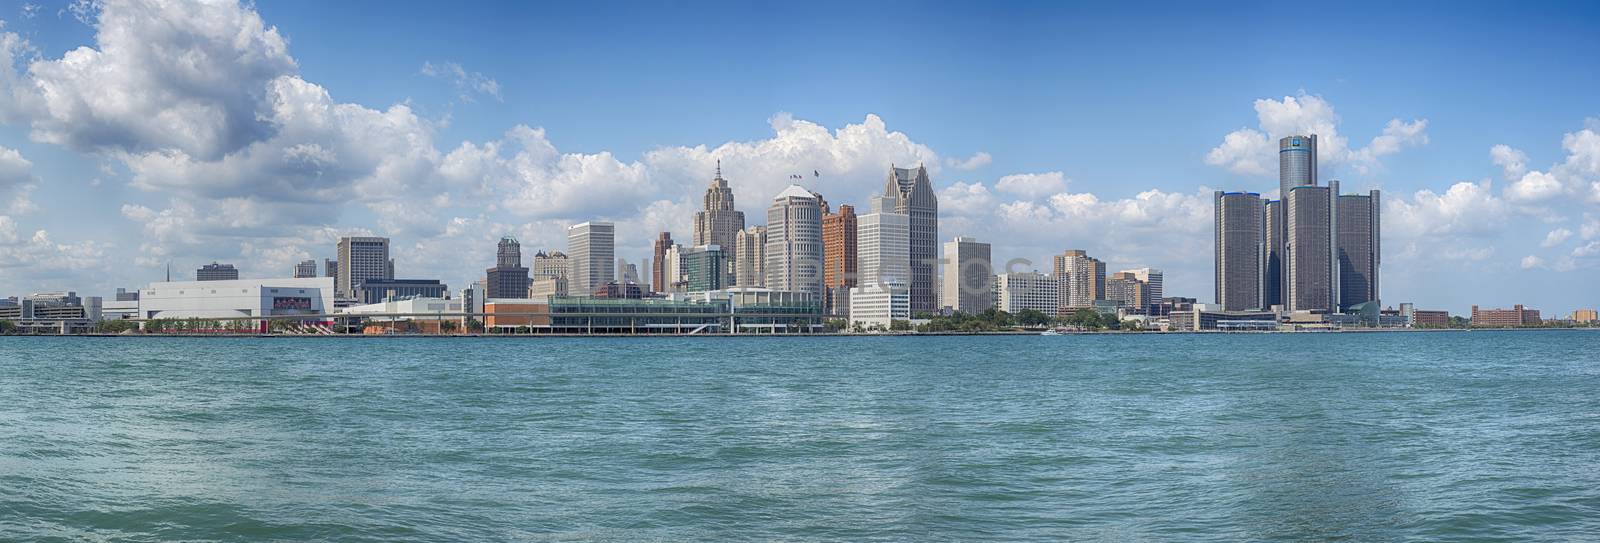 Detroit skyline panorama by rgbspace